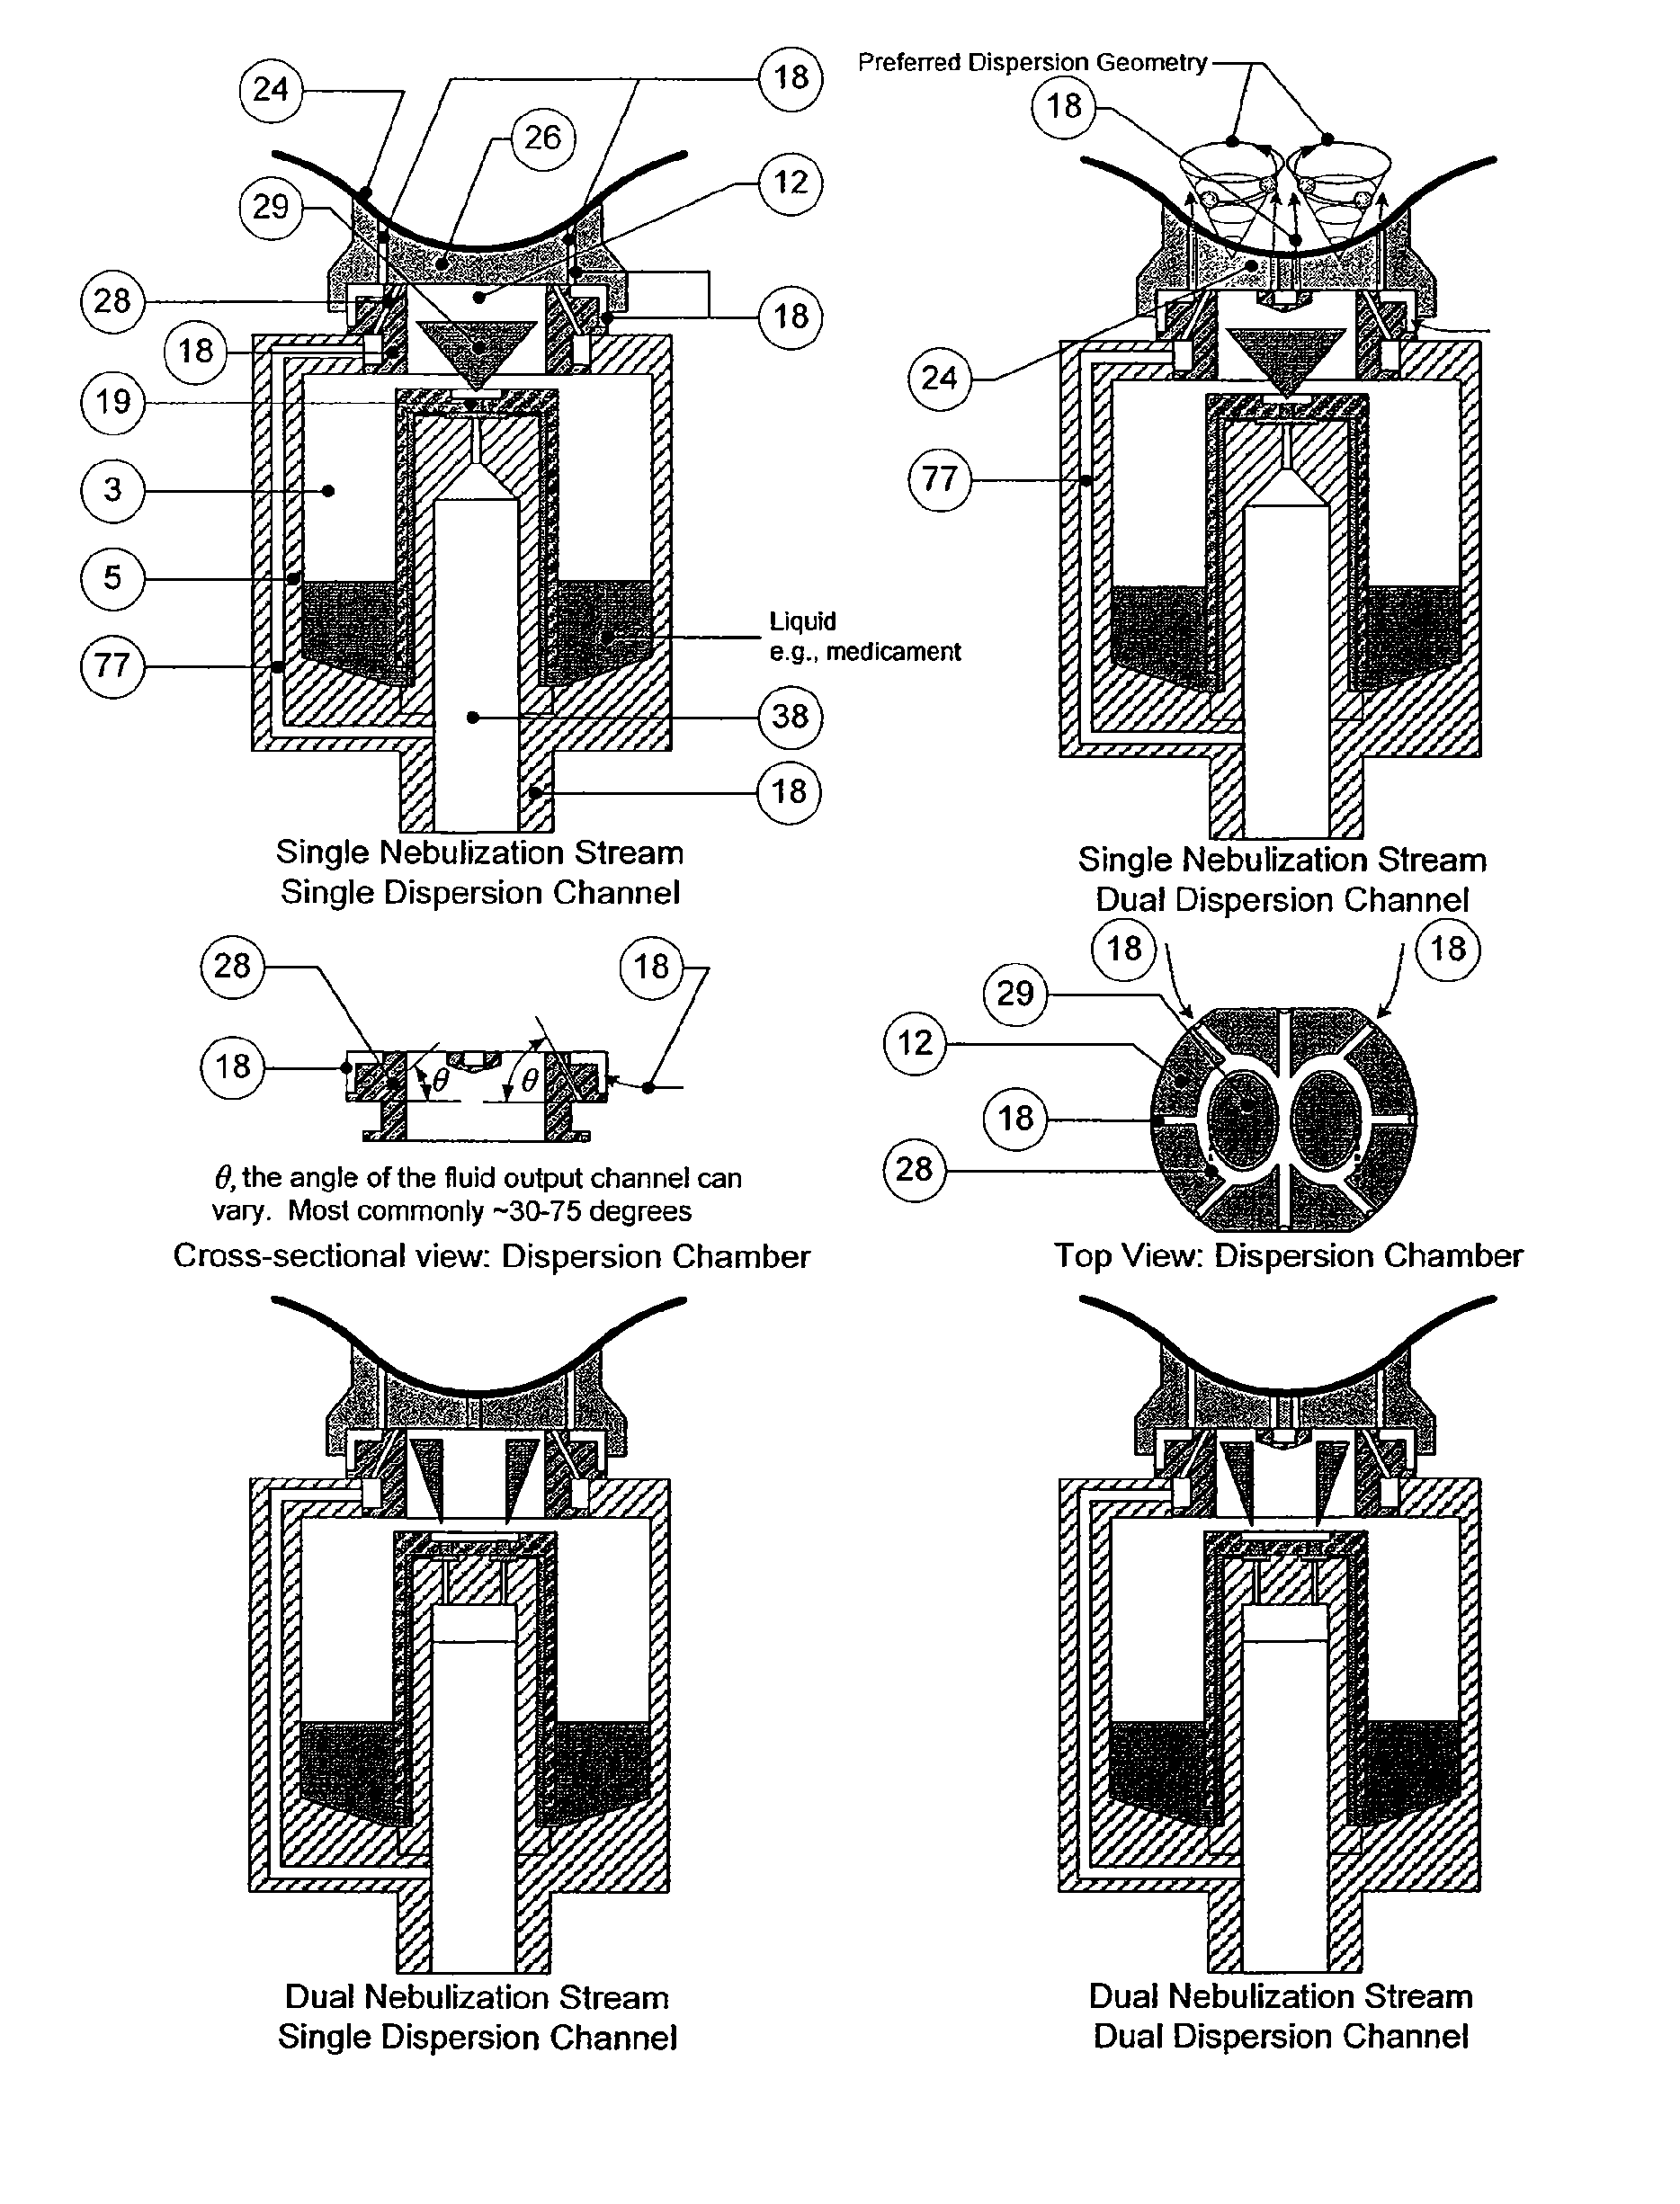 Integrated nebulizer and particle dispersion chamber for nasal delivery of medicament to deep nasal cavity and paranasal sinuses